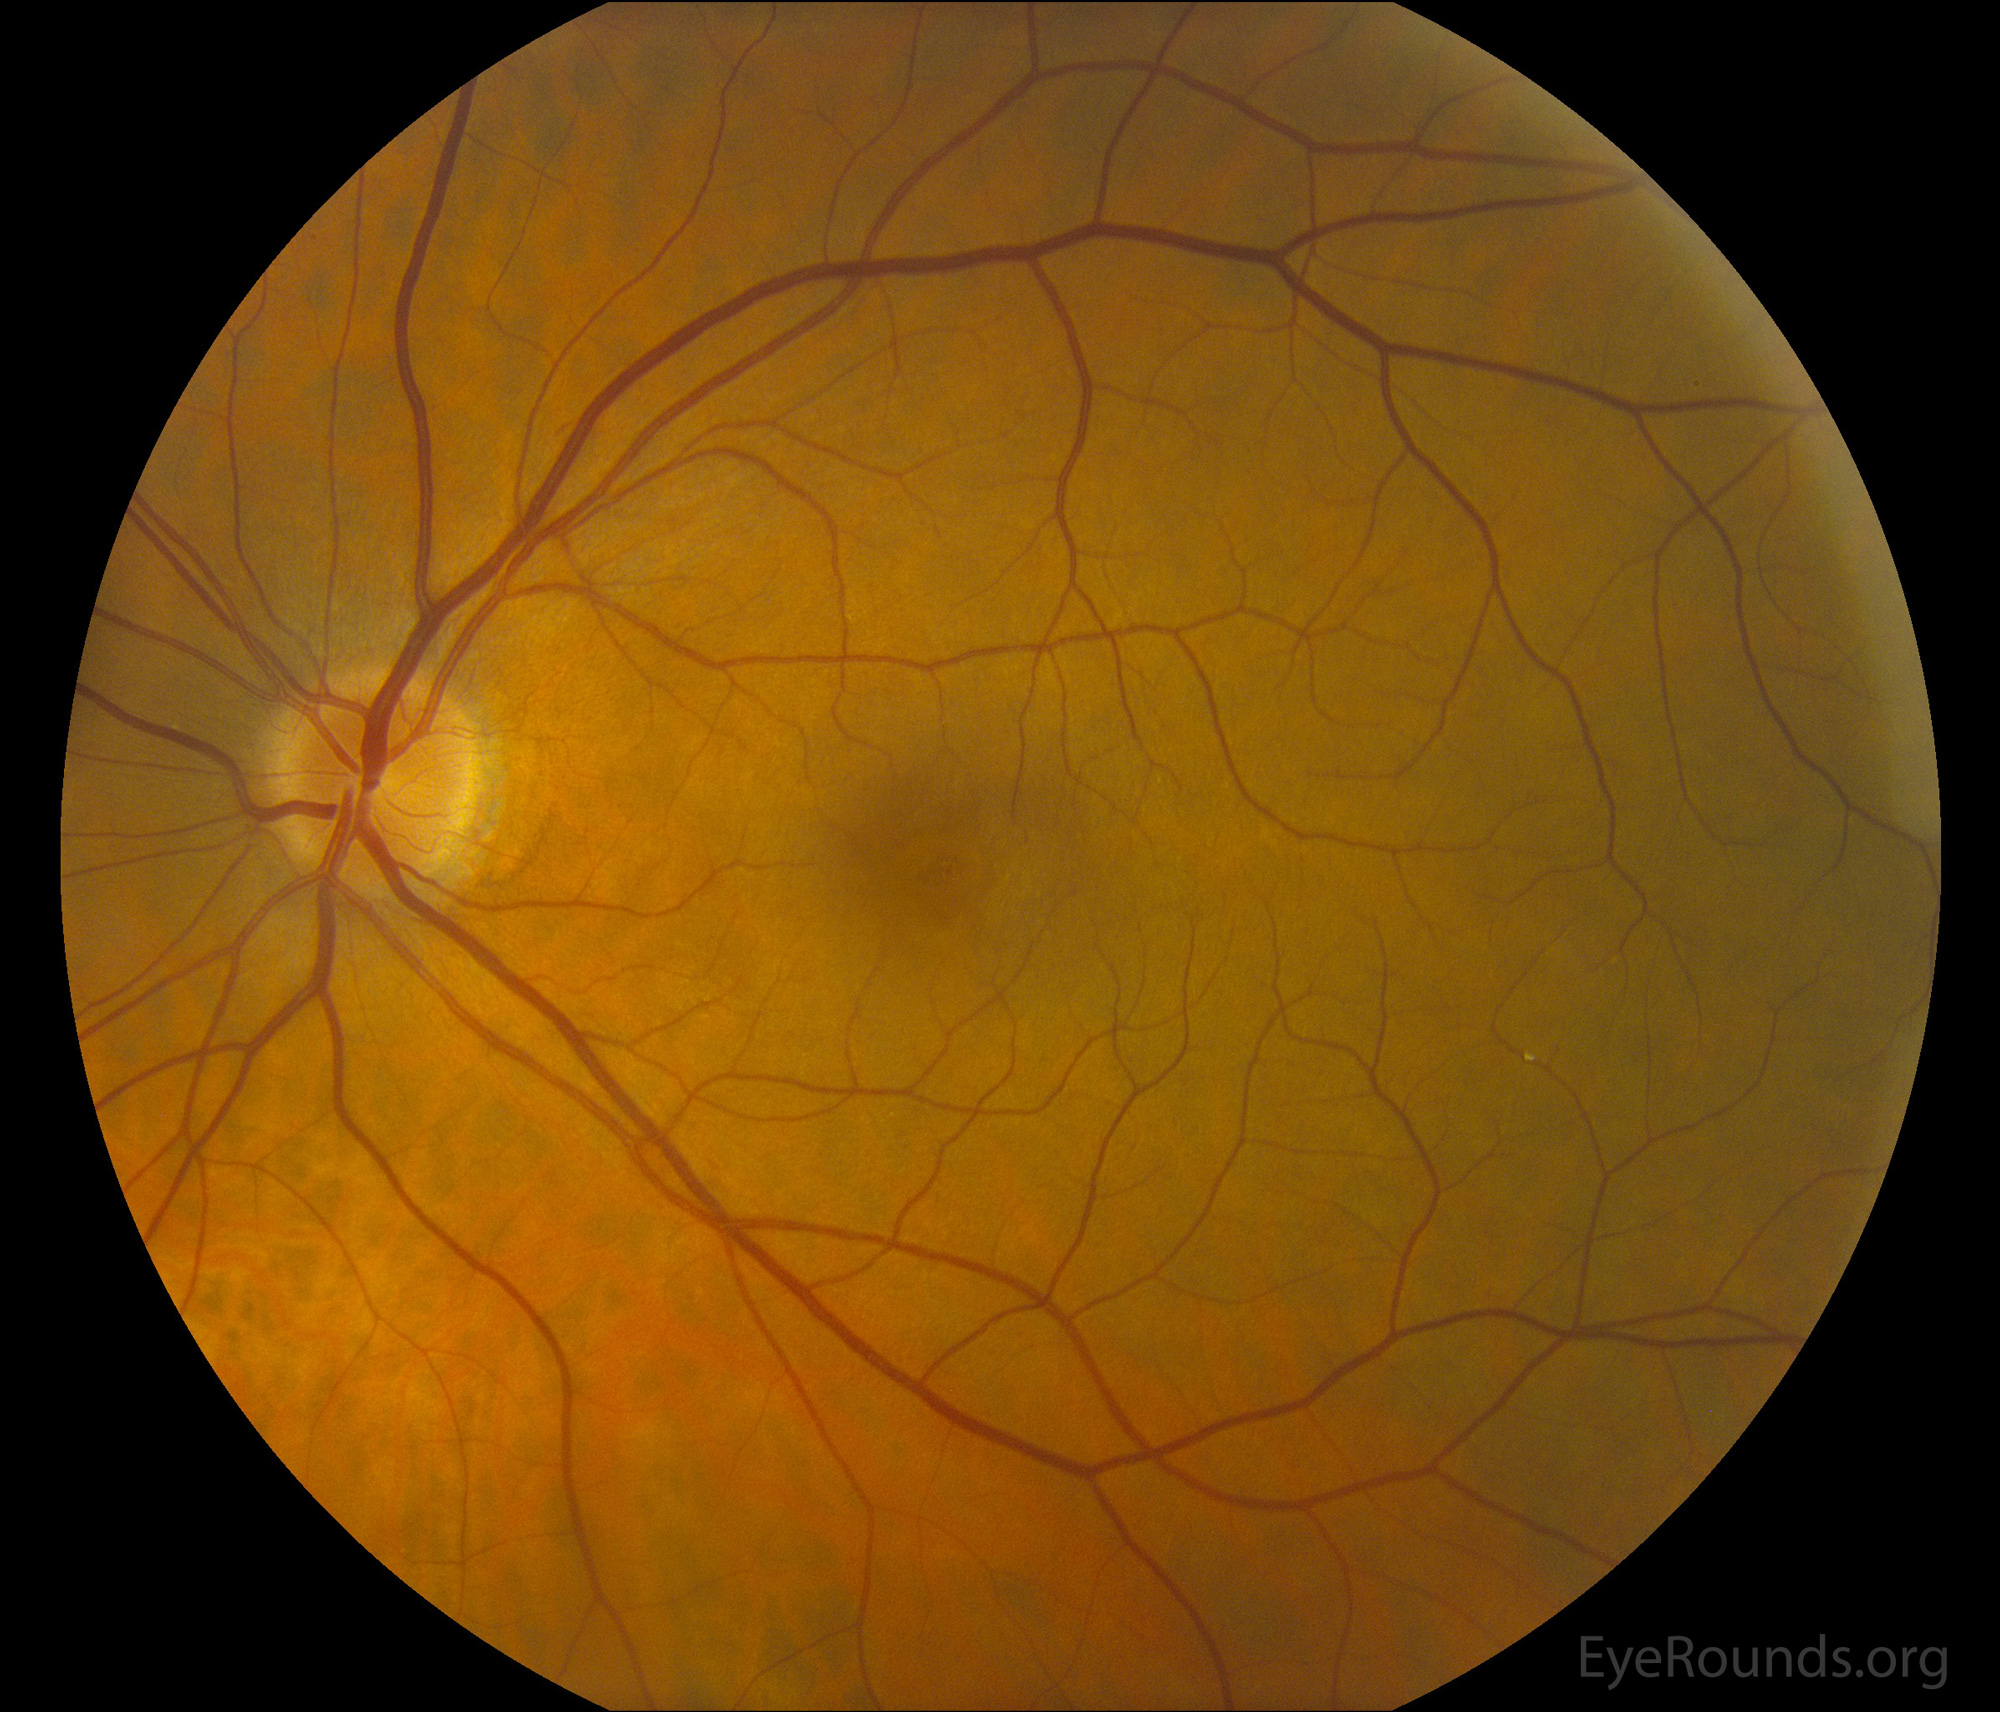 macular hole, an incidental yellow-orange plaque was visible within a vessel of the inferotemporal arcades within the inferotemporal macula